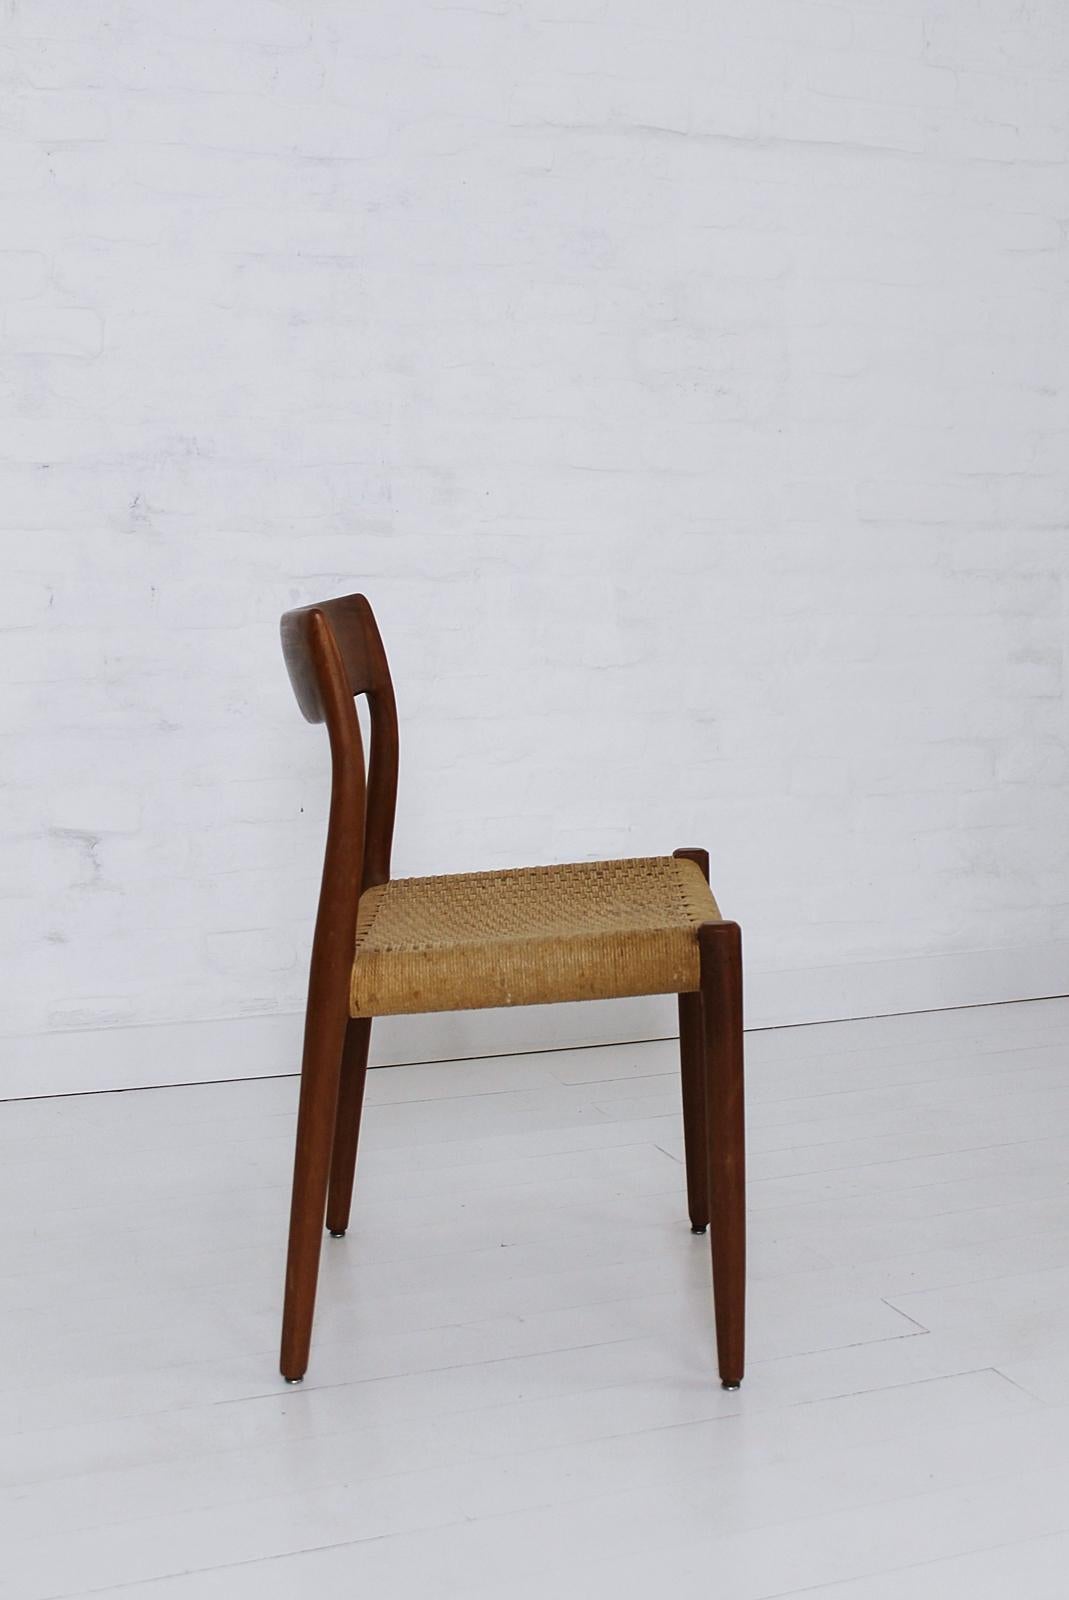 Papercord Set of 3 Chairs Model 77 by Niels O. Møller in Teak and Paper Cord, 1950s